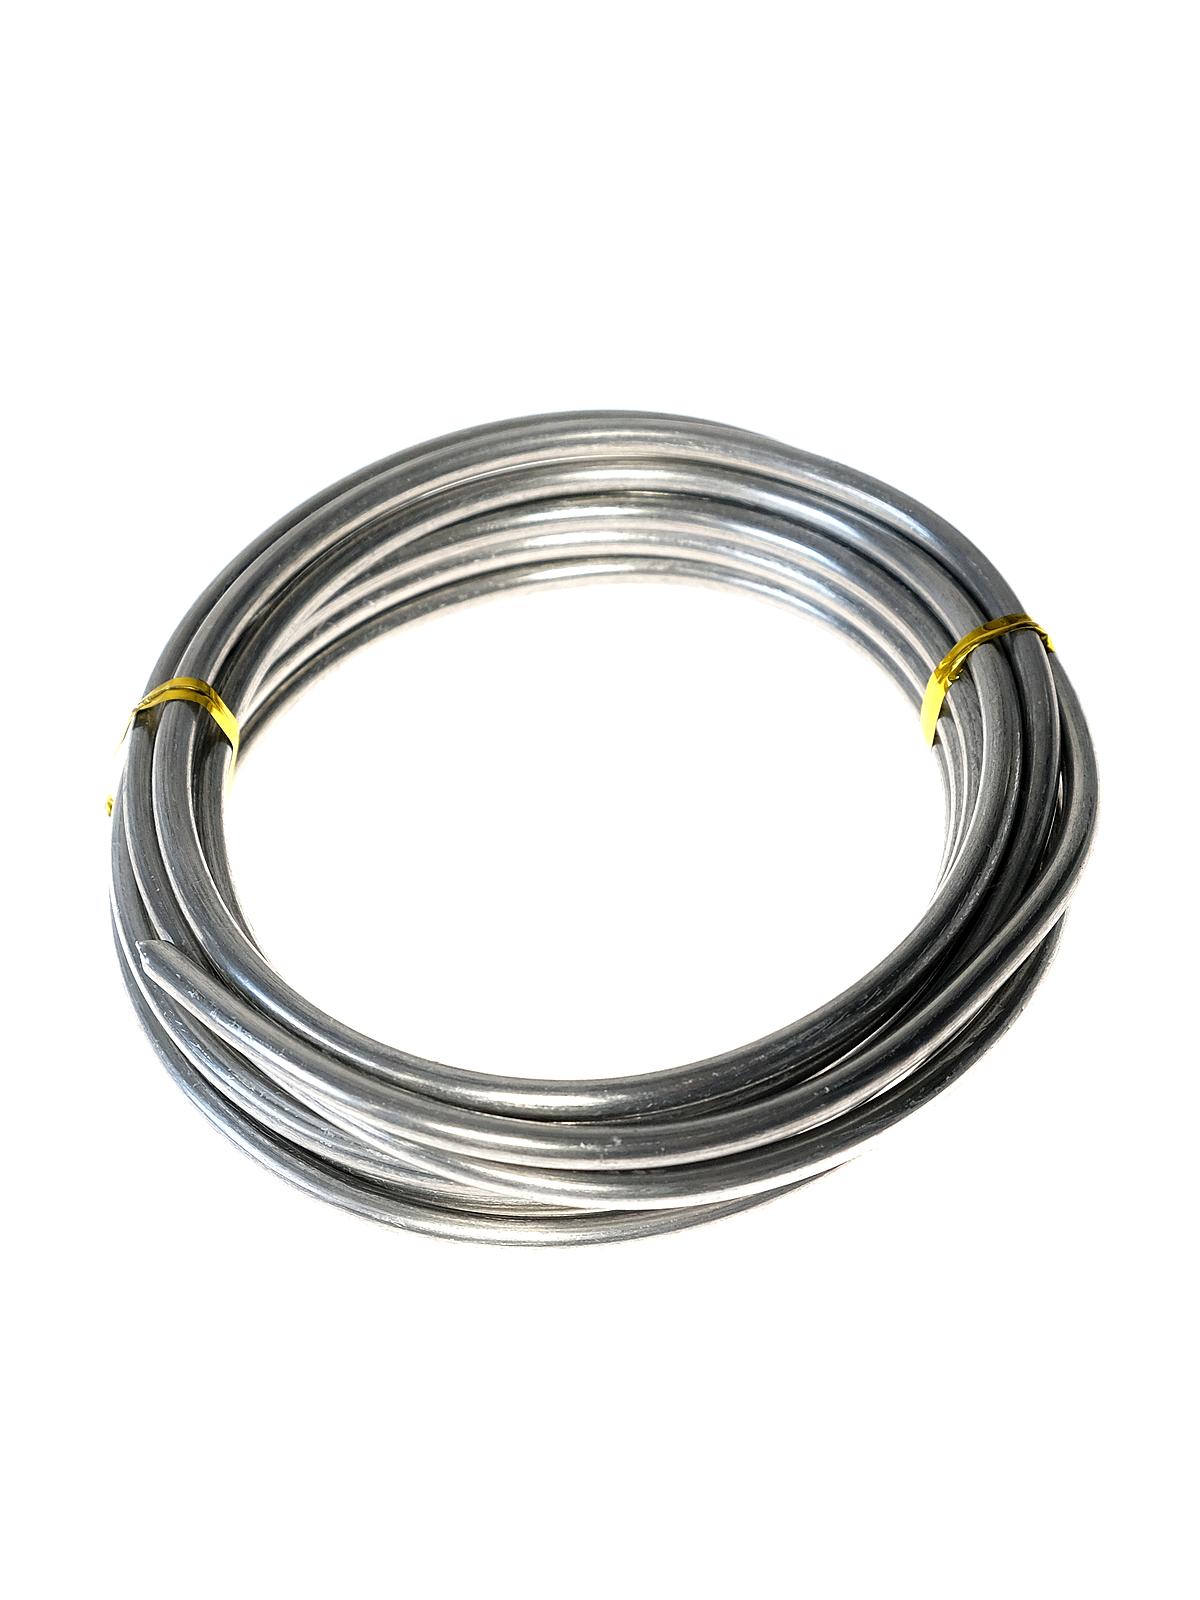 Armature Wire 6 Gauge 10 Ft. X 3 16 In.